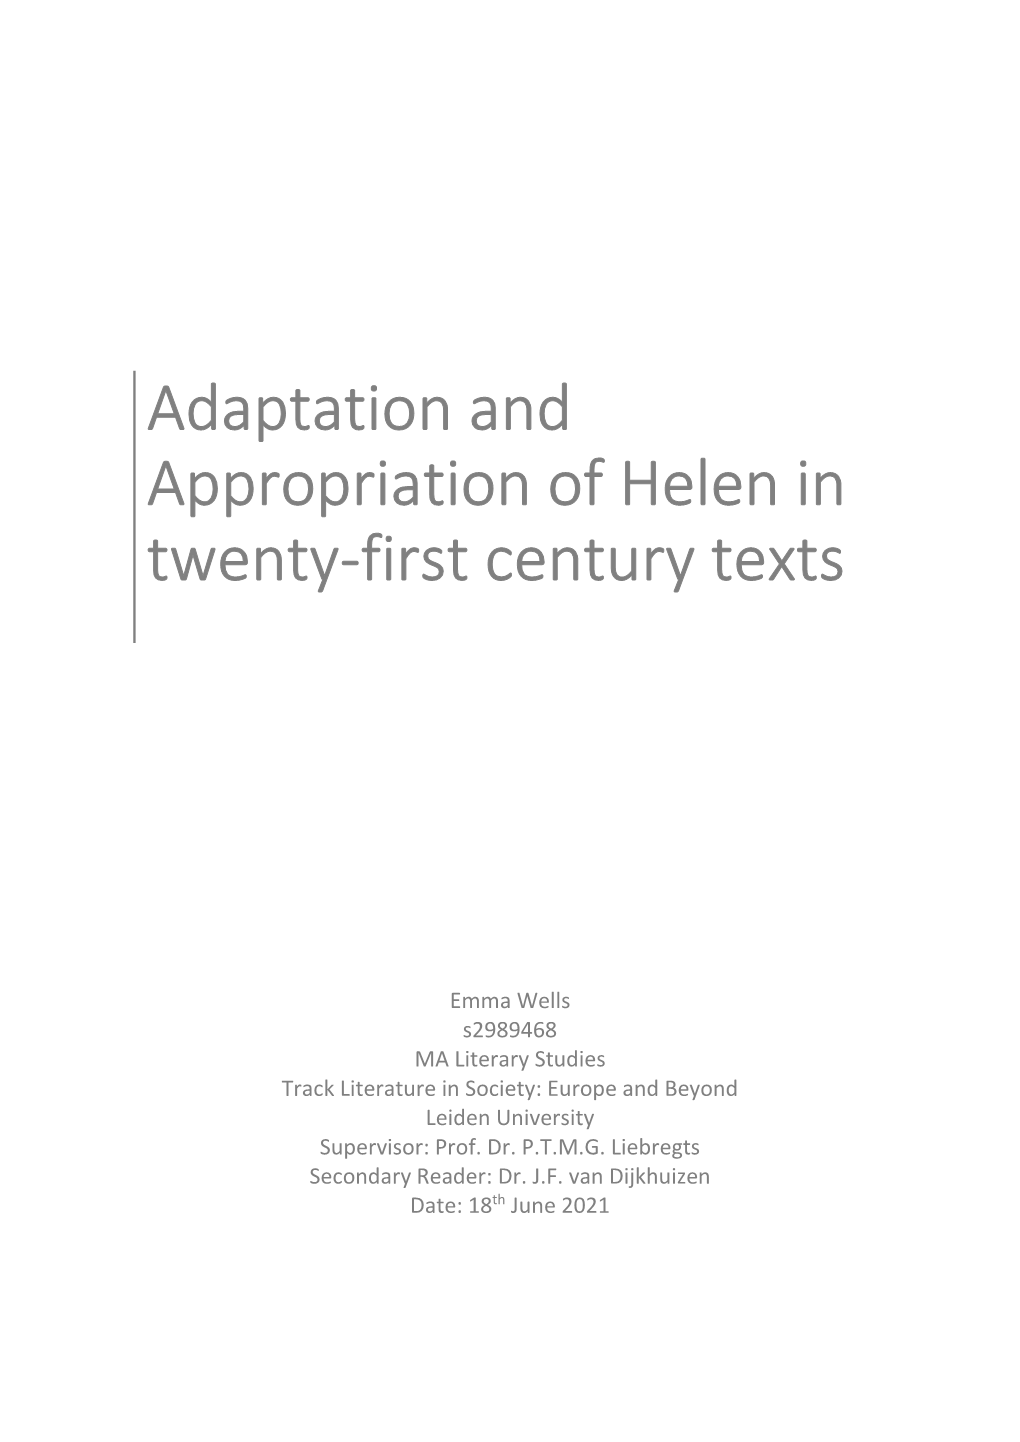 Adaptation and Appropriation of Helen in Twenty-First Century Texts